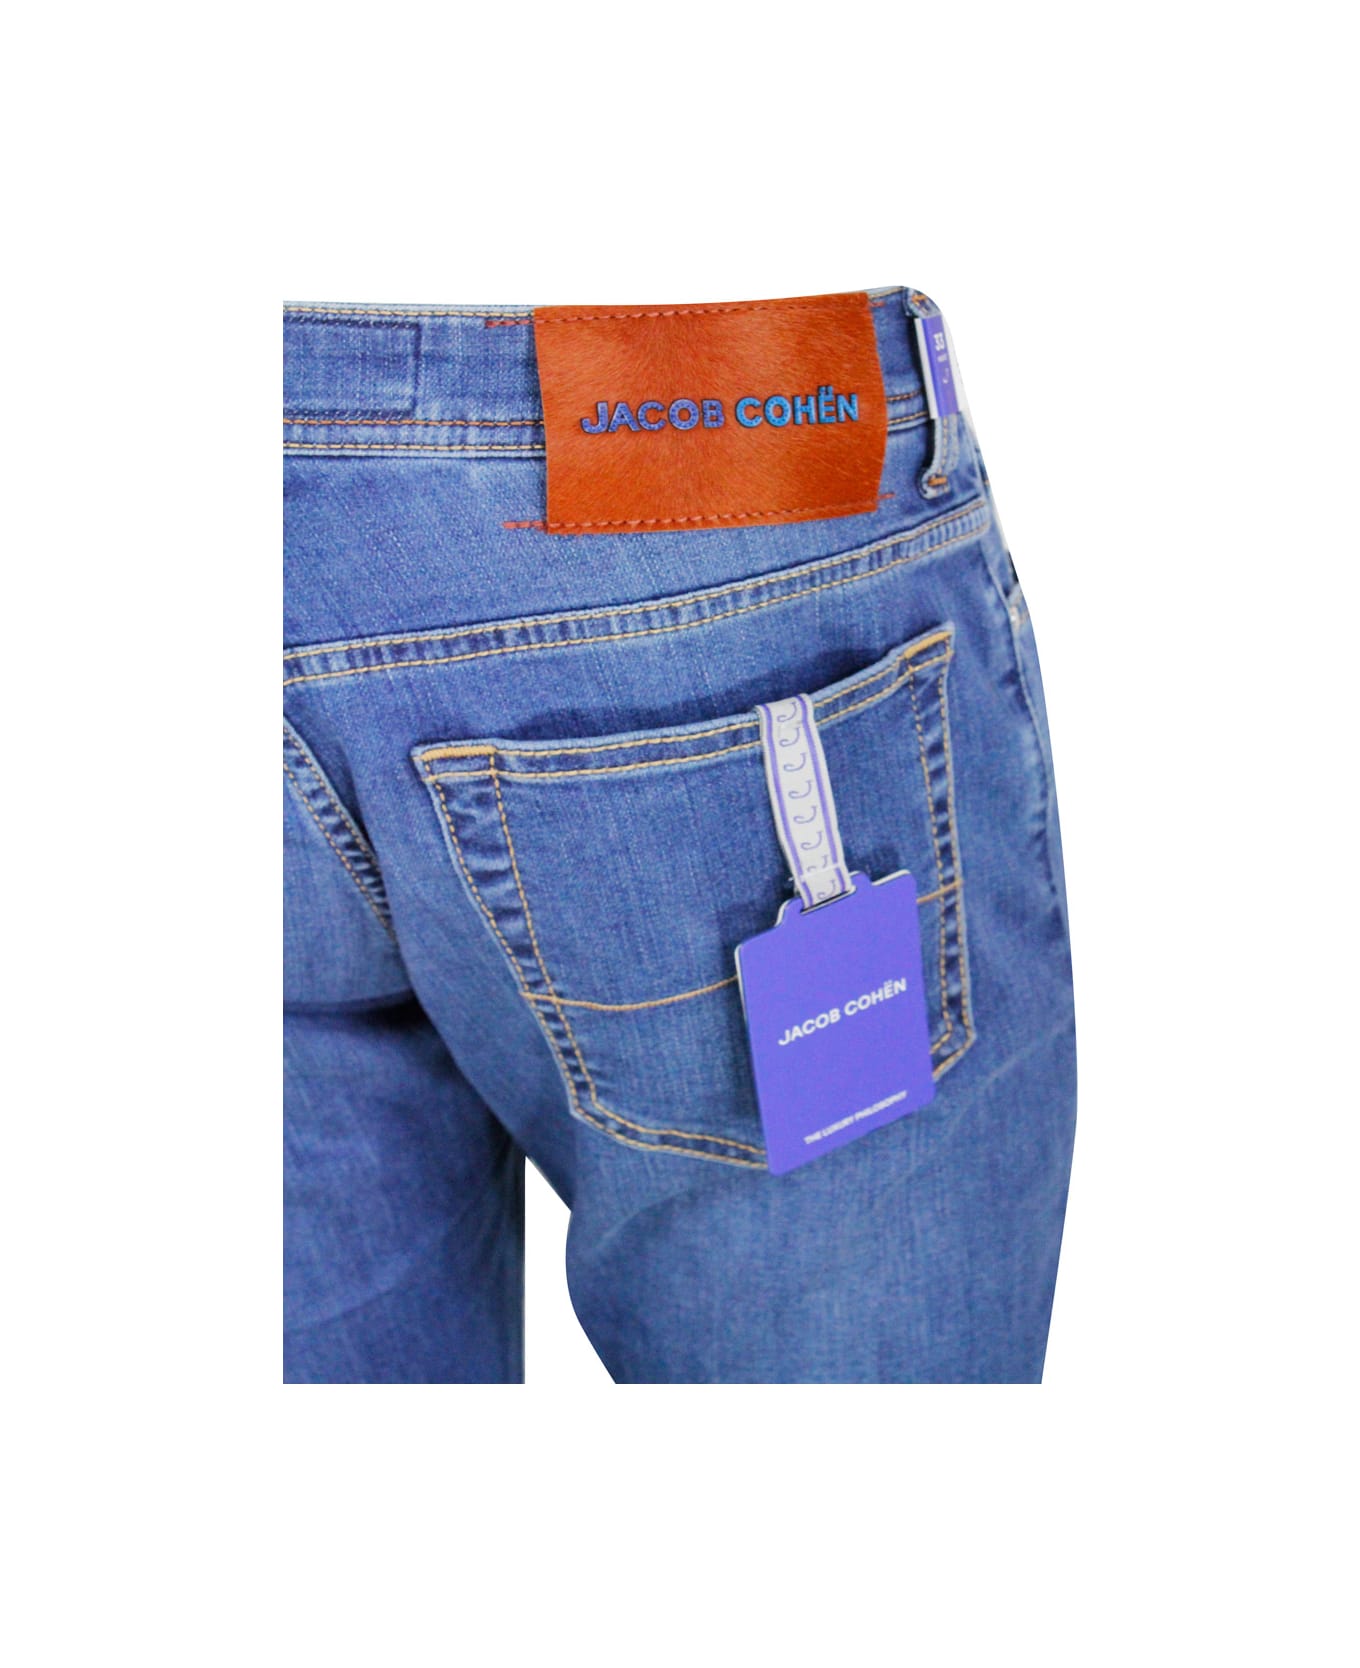 Jacob Cohen Bard J688 Luxury Edition Denim Trousers In Soft Stretch Denim With 5 Pockets With Closure Buttons And Lacquered Pony Skin Button With Logo - Blue